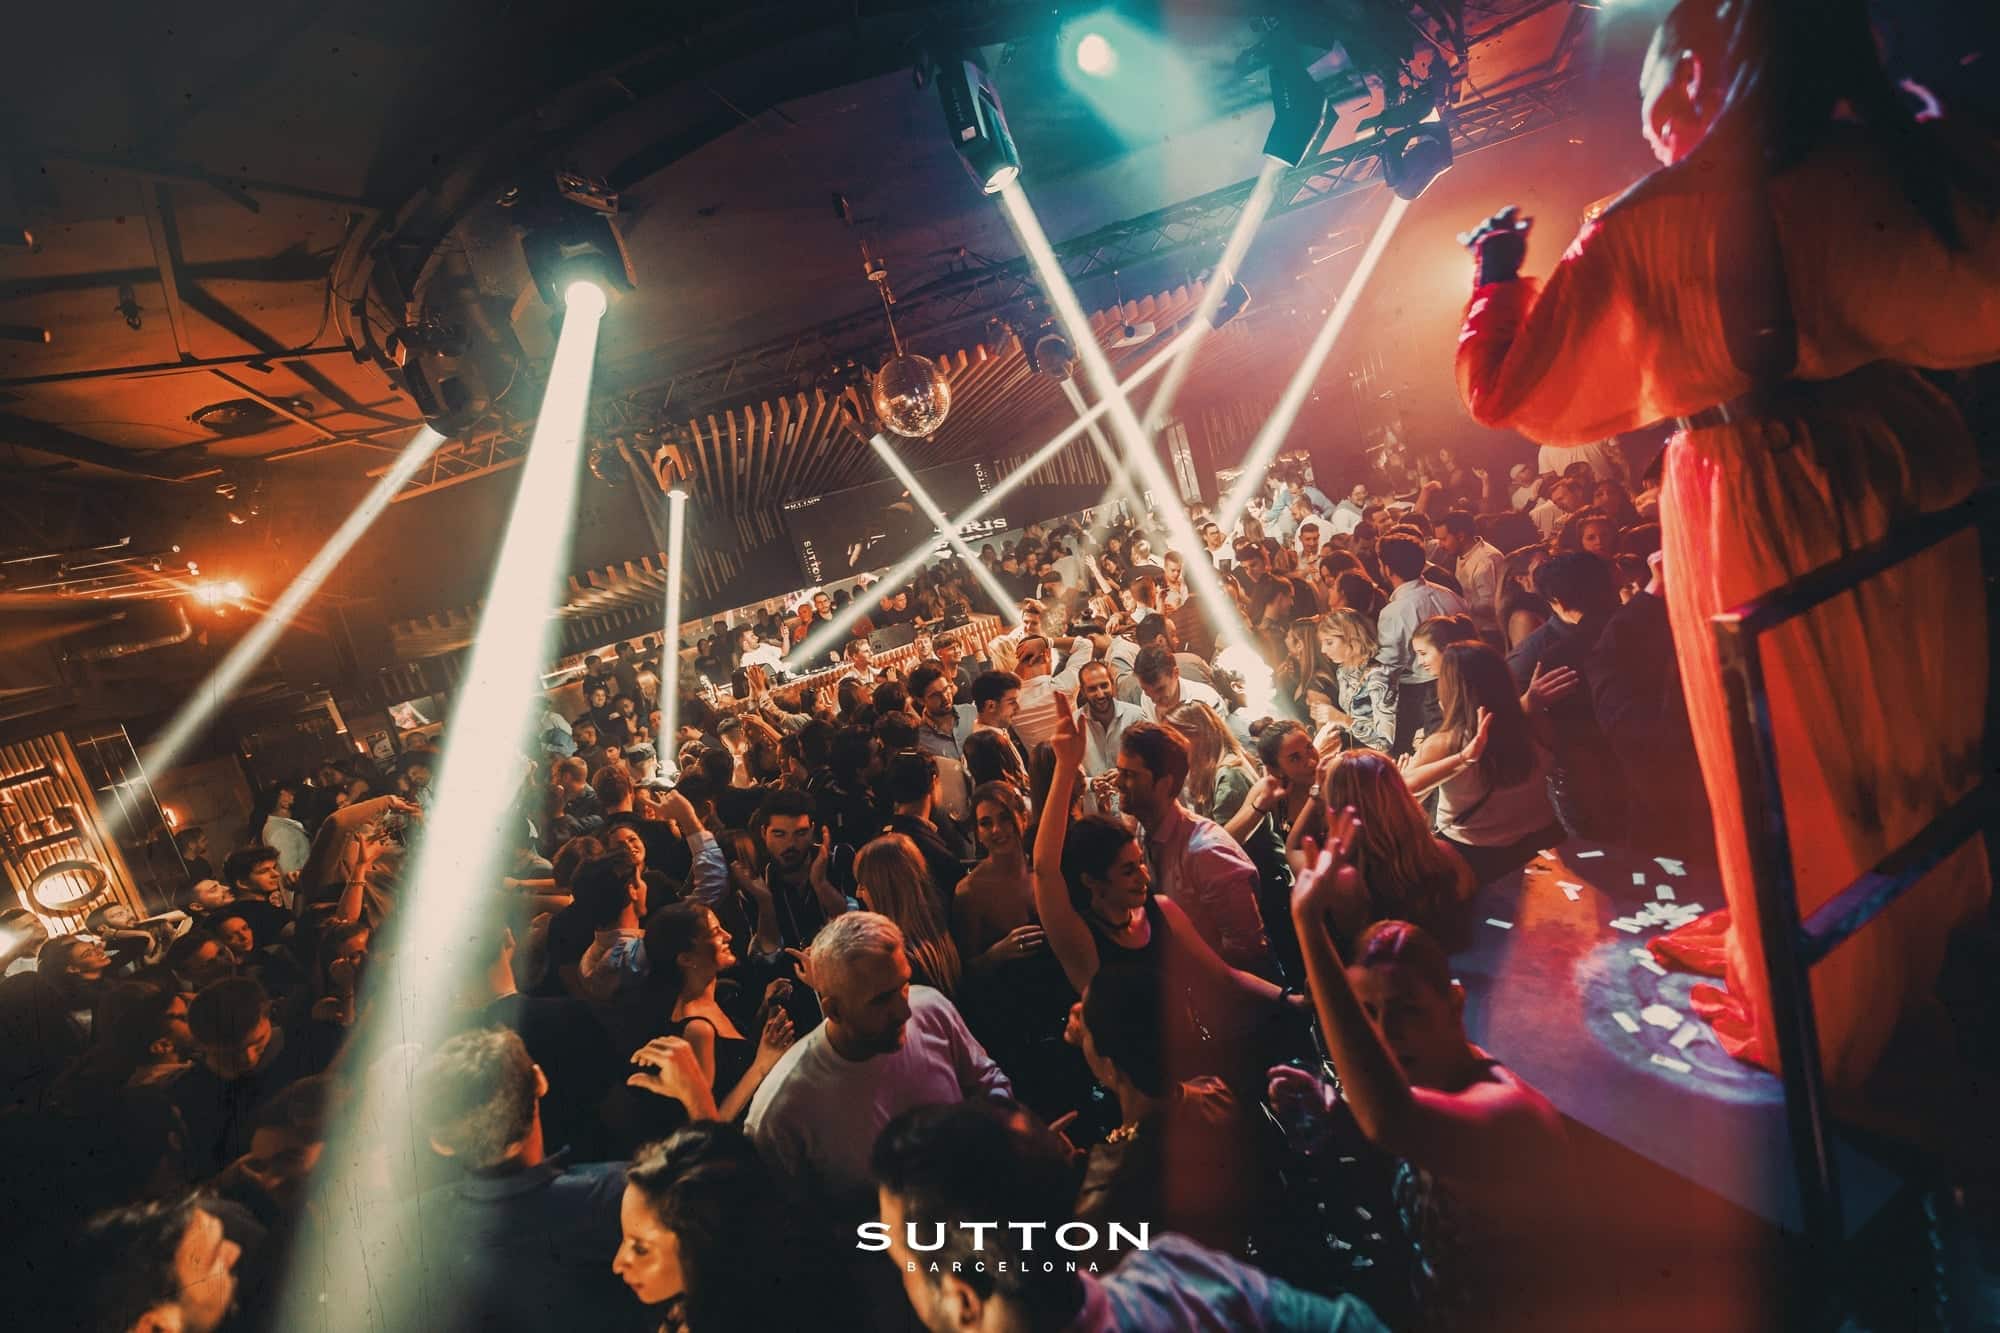 people-dancing-and-partying-at-sutton-barcelona